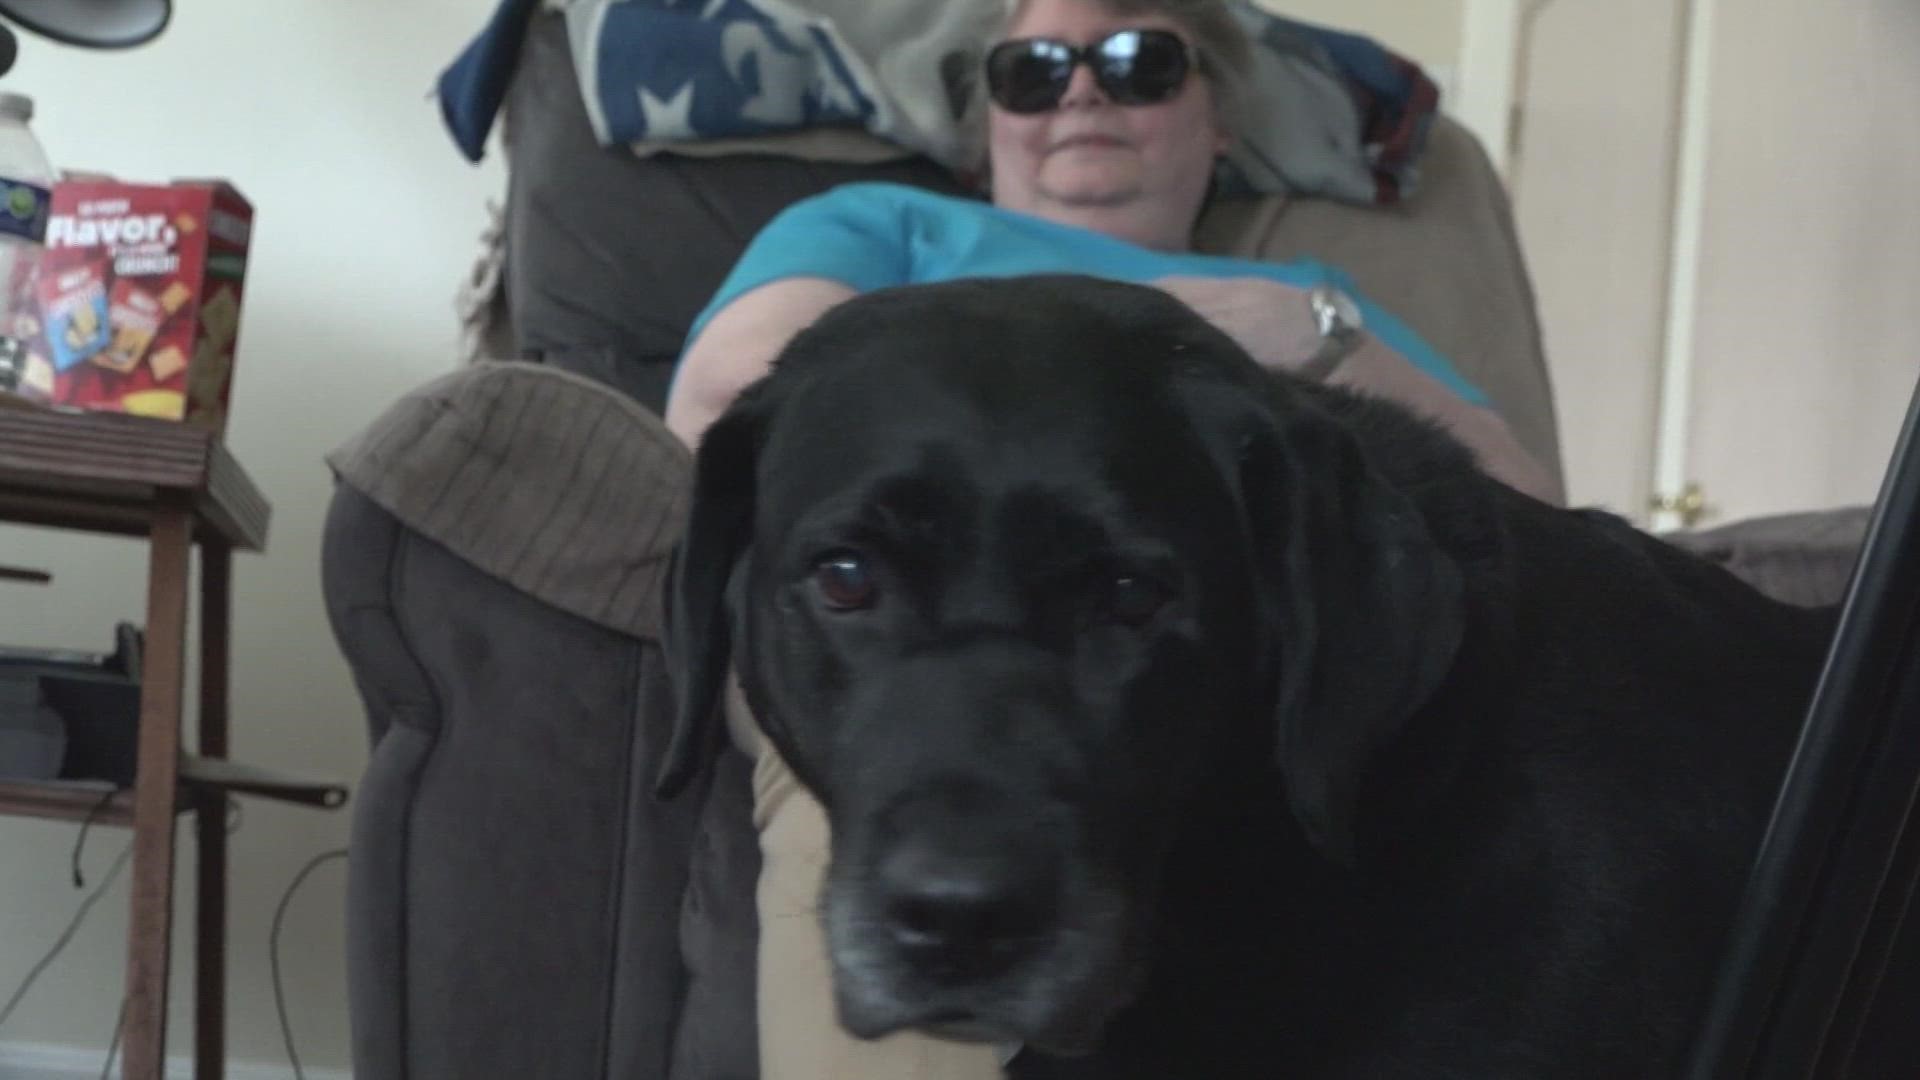 A local nonprofit, Guiding Eyes For The Blind,  is giving the visually impaired a life of independence.